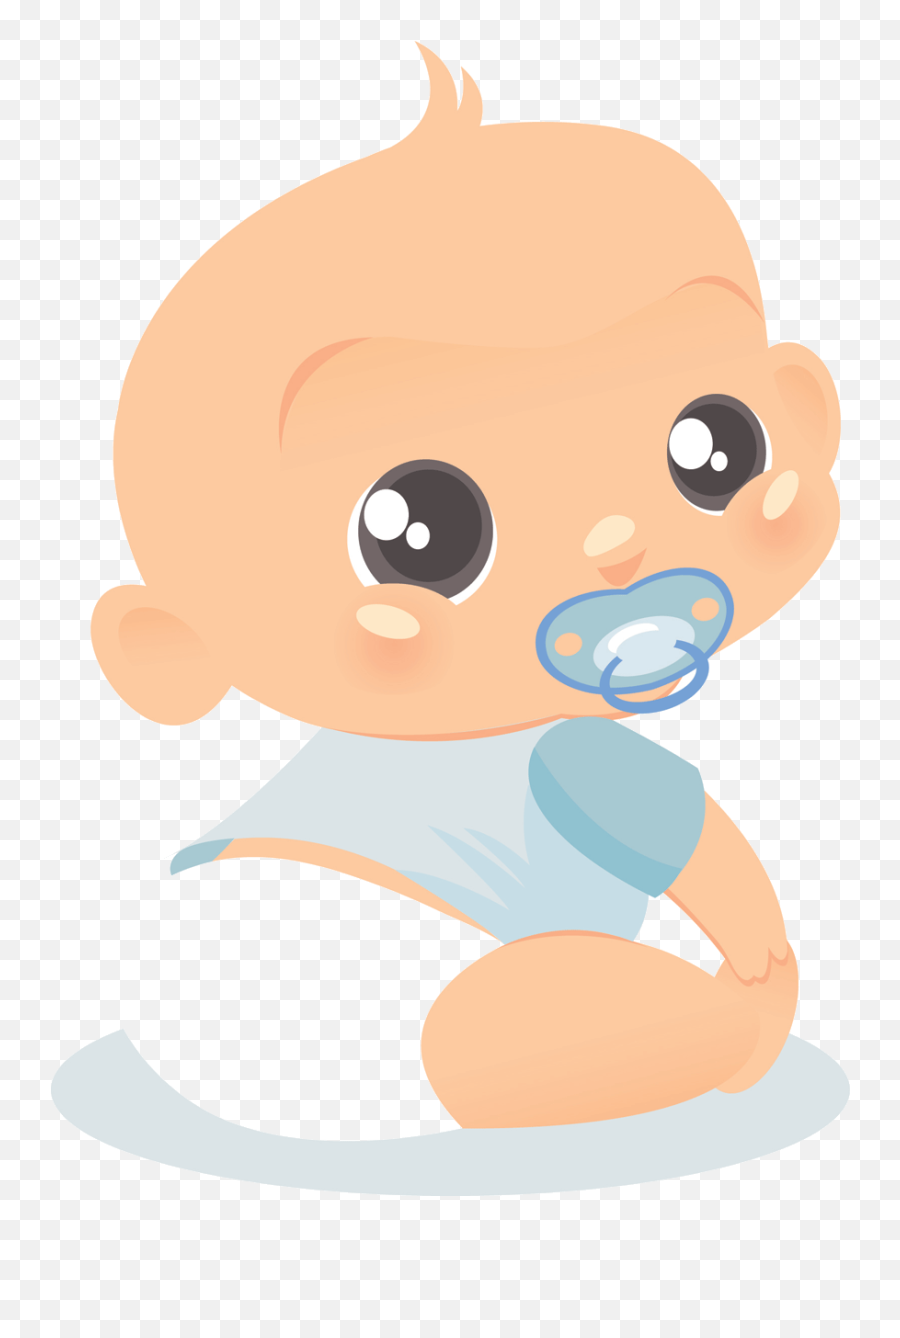 Download Png Images Of Cartoon Baby Boy Svg Royalty Free - Infant,Baby Boy Png